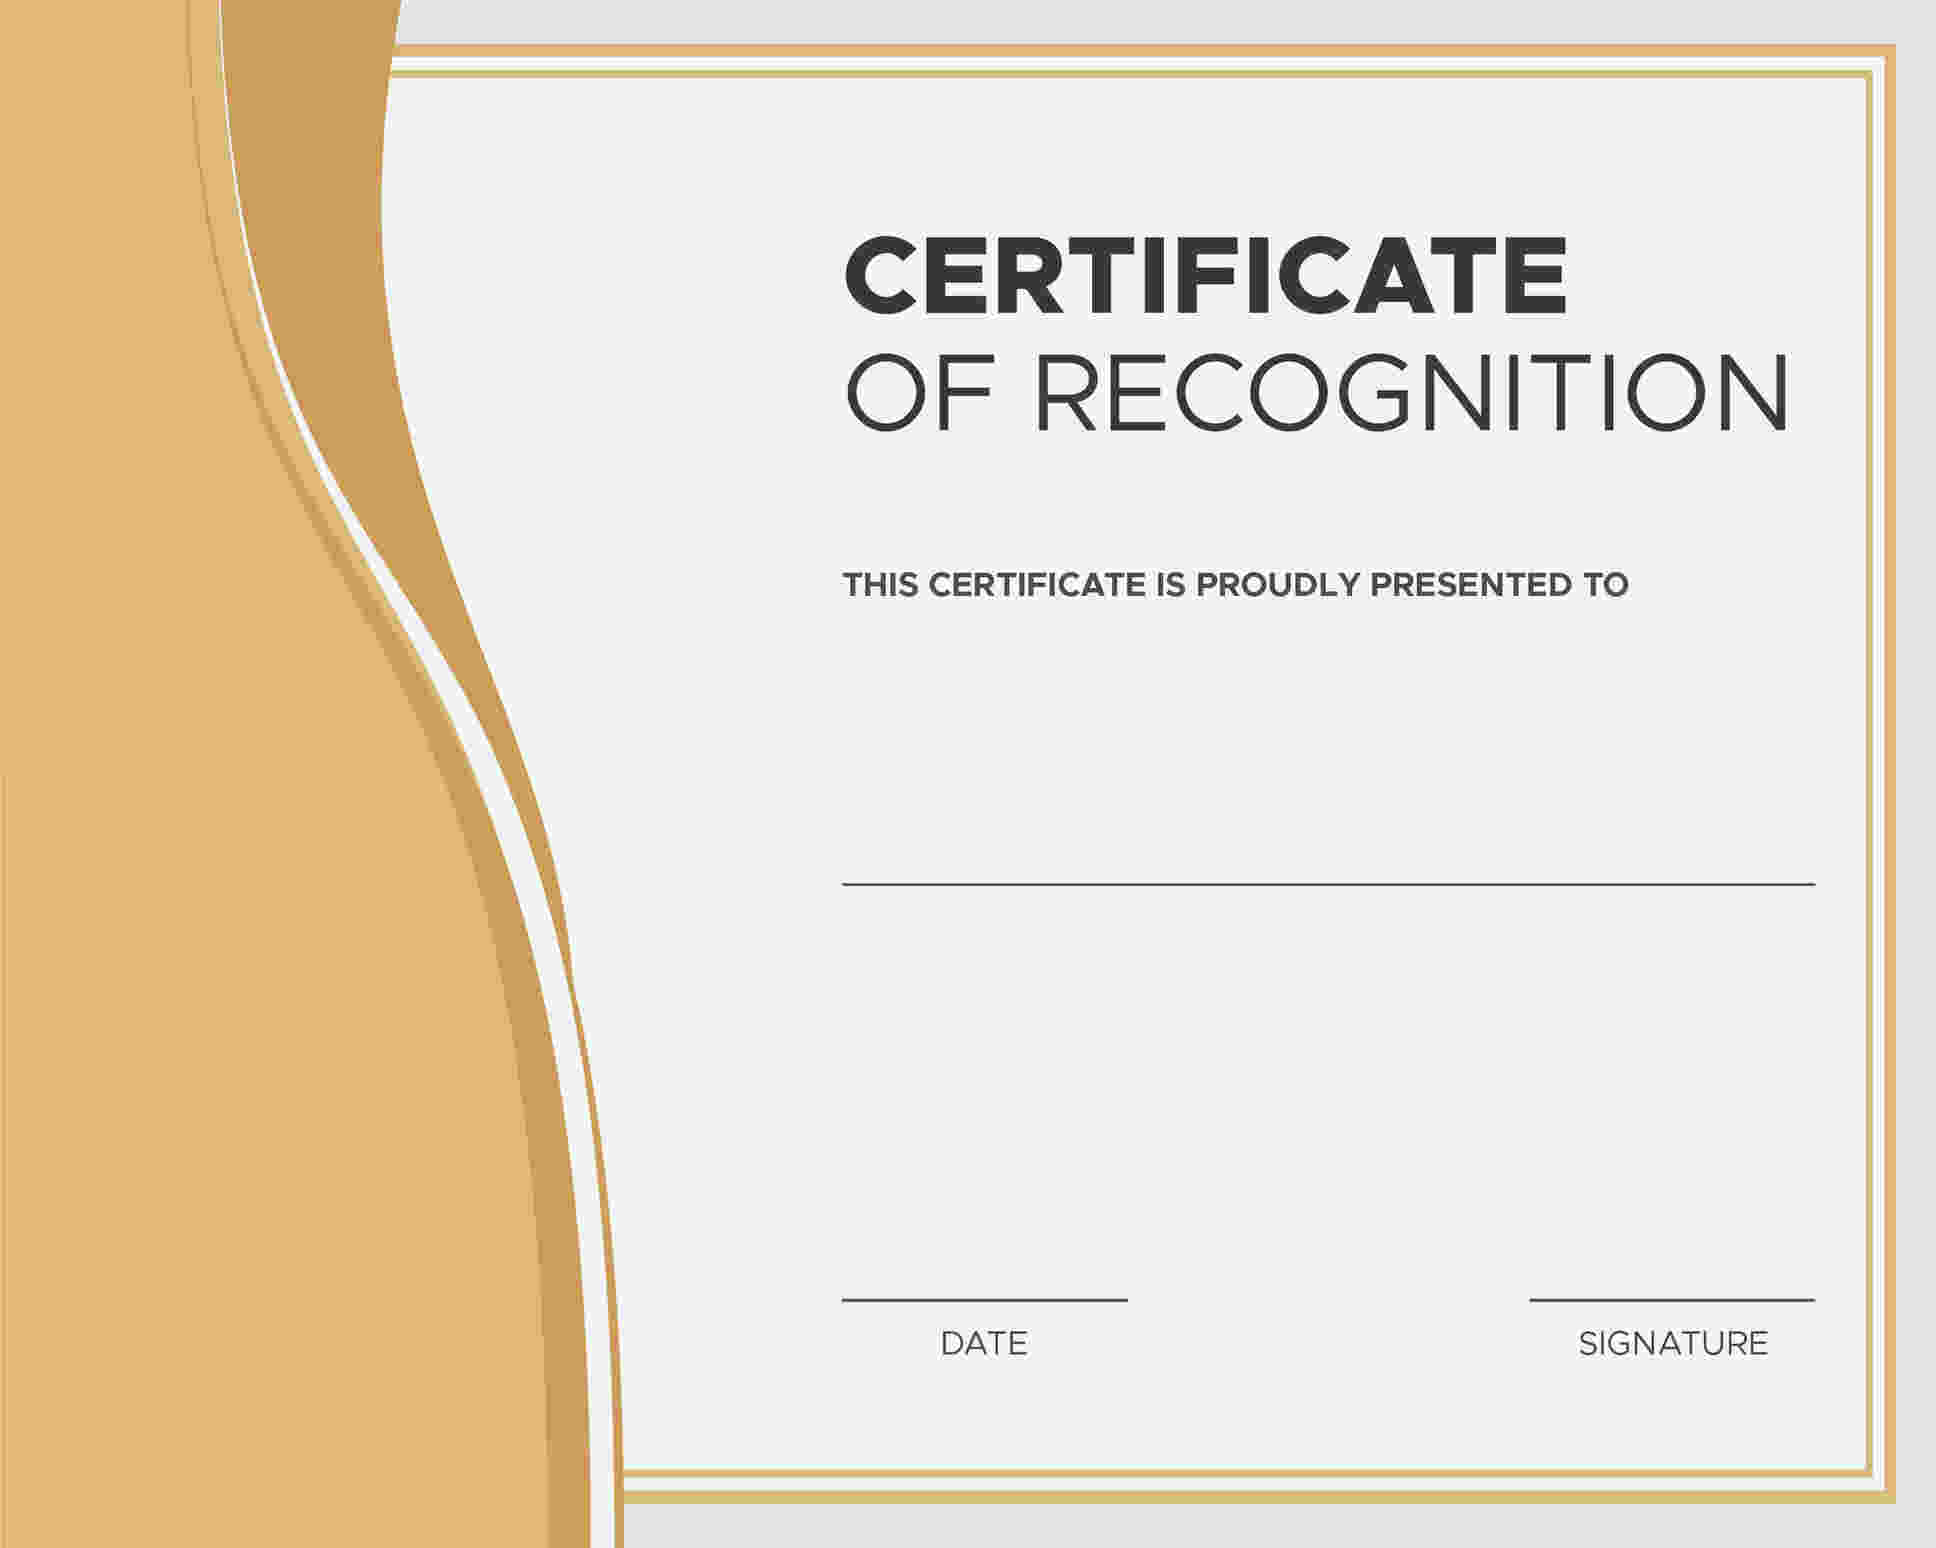 10 Amazing Award Certificate Templates in 10 - Recognize Pertaining To Employee Recognition Certificates Templates Free